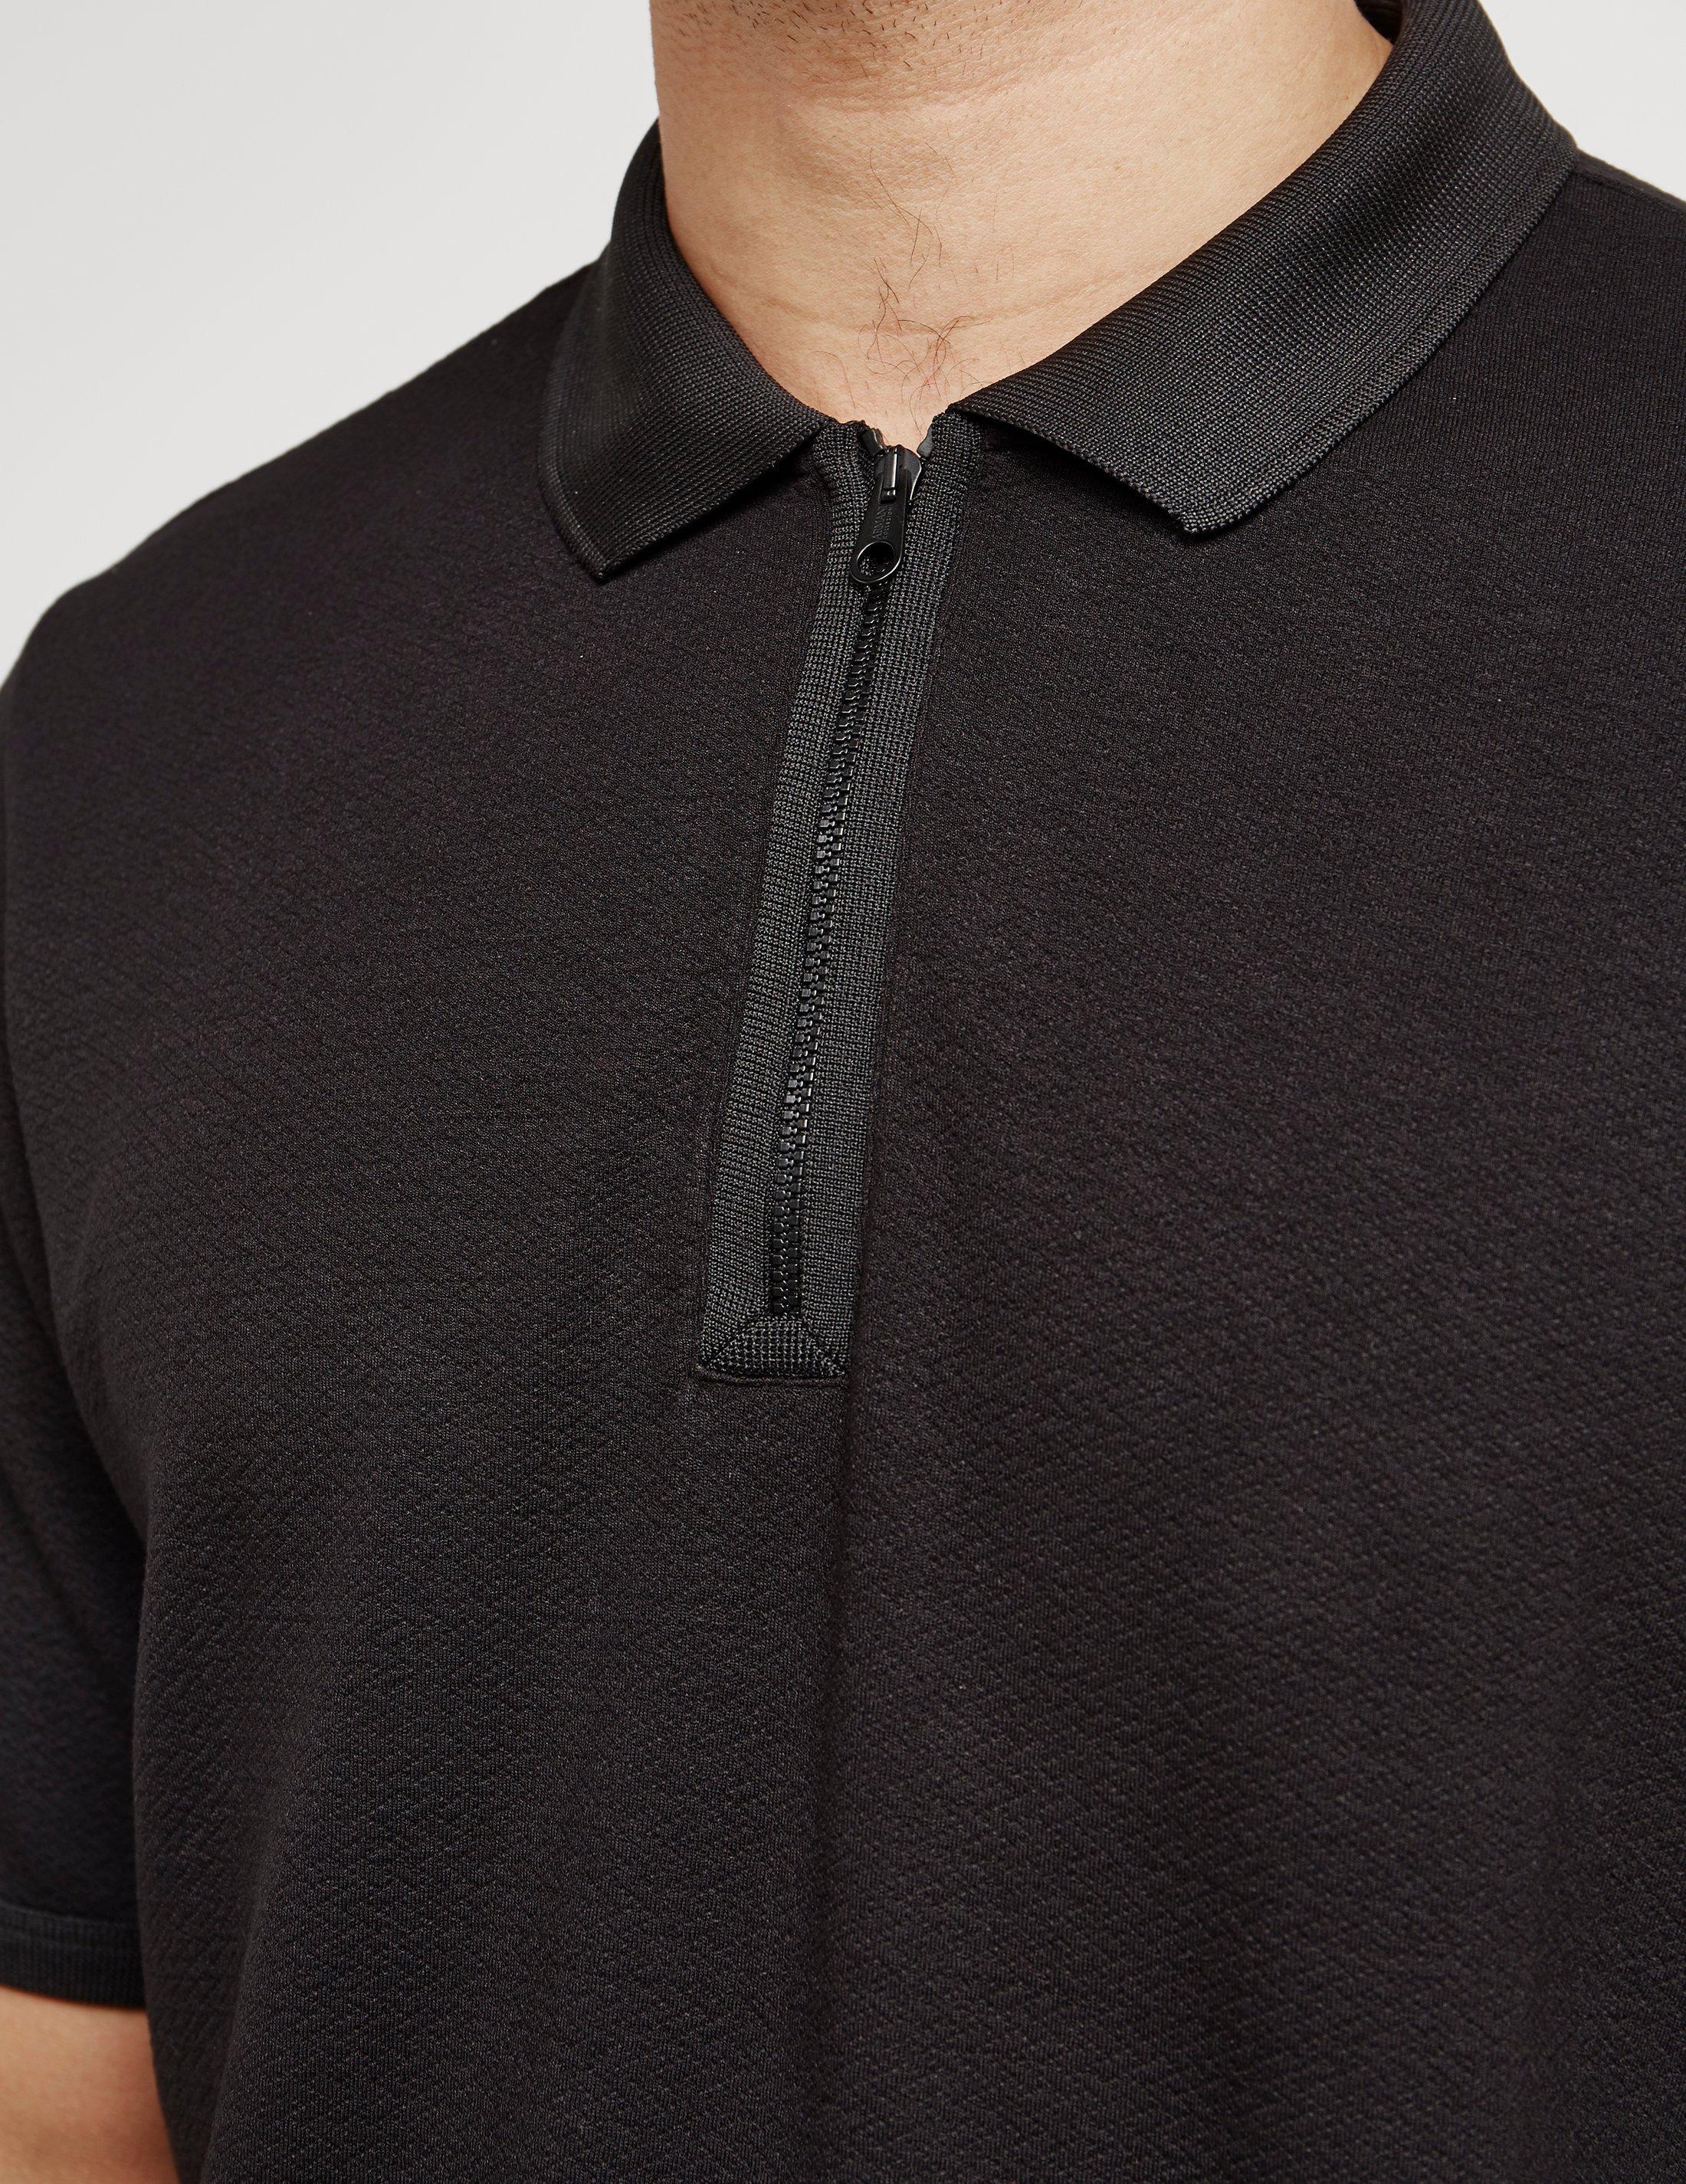 Armani Zip Polo Shirt - Online Exclusive Black in Black for Men - Lyst